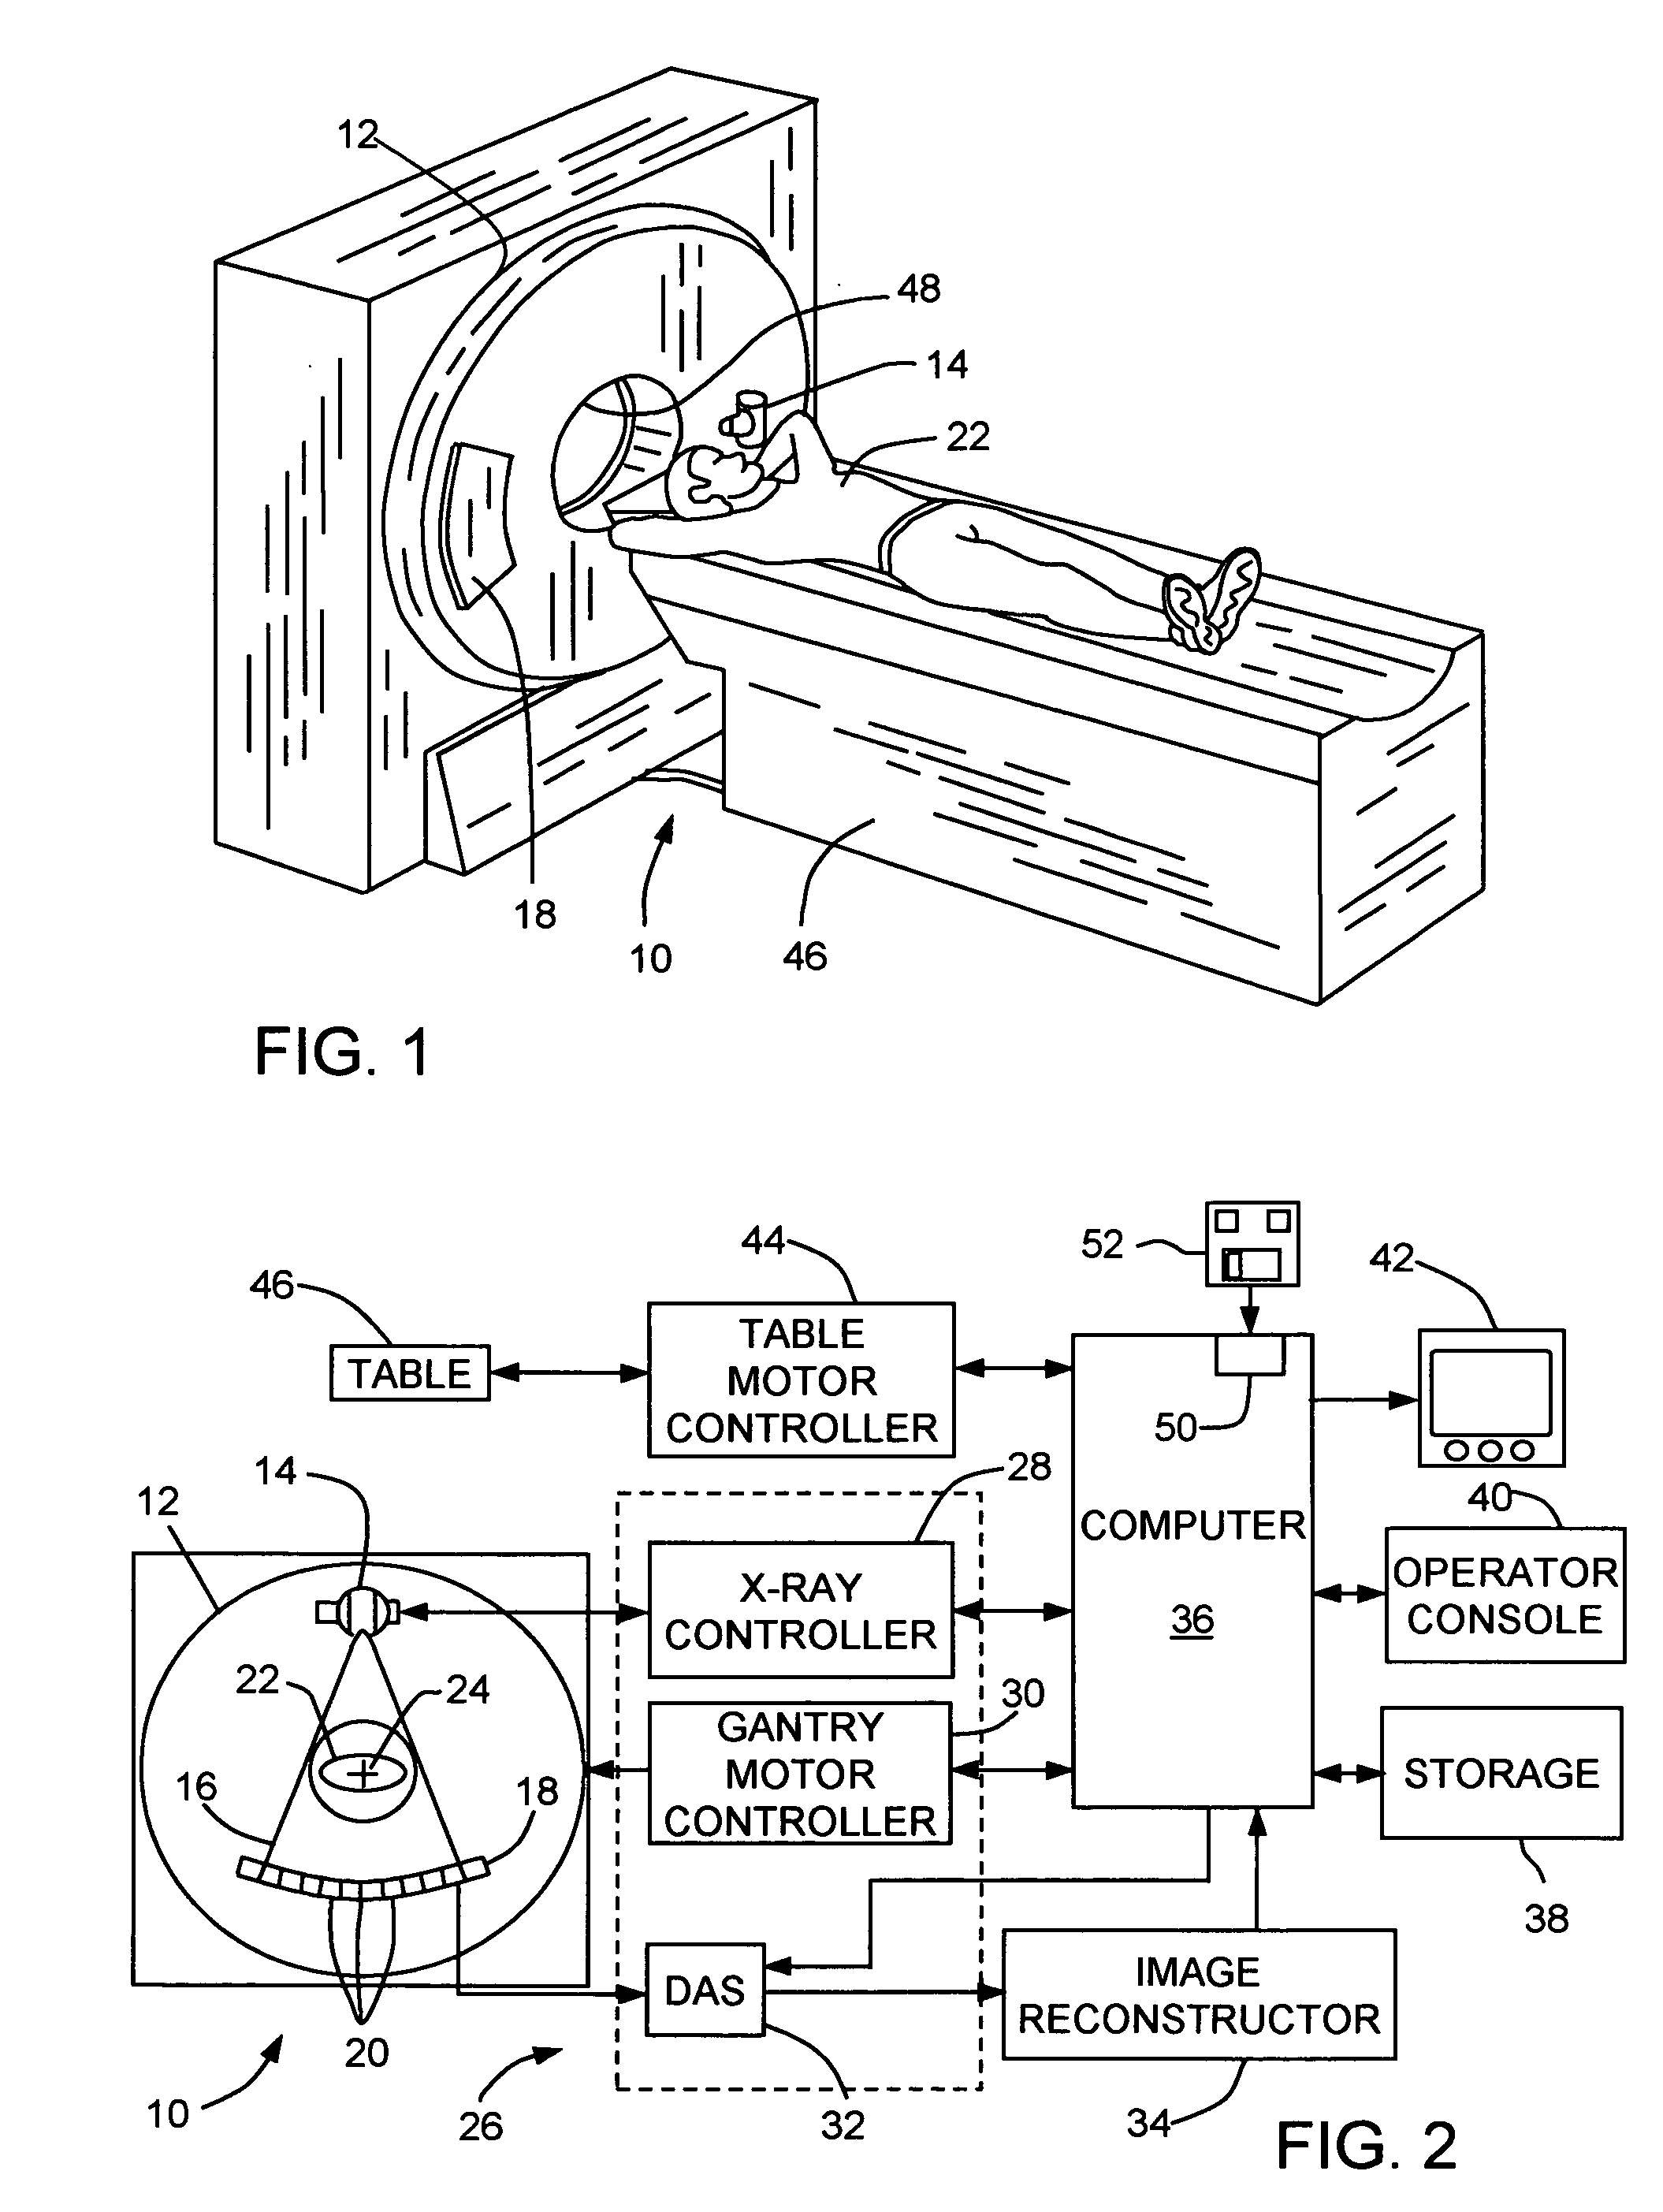 Method for quantifying an object in a larger structure using a reconstructed image